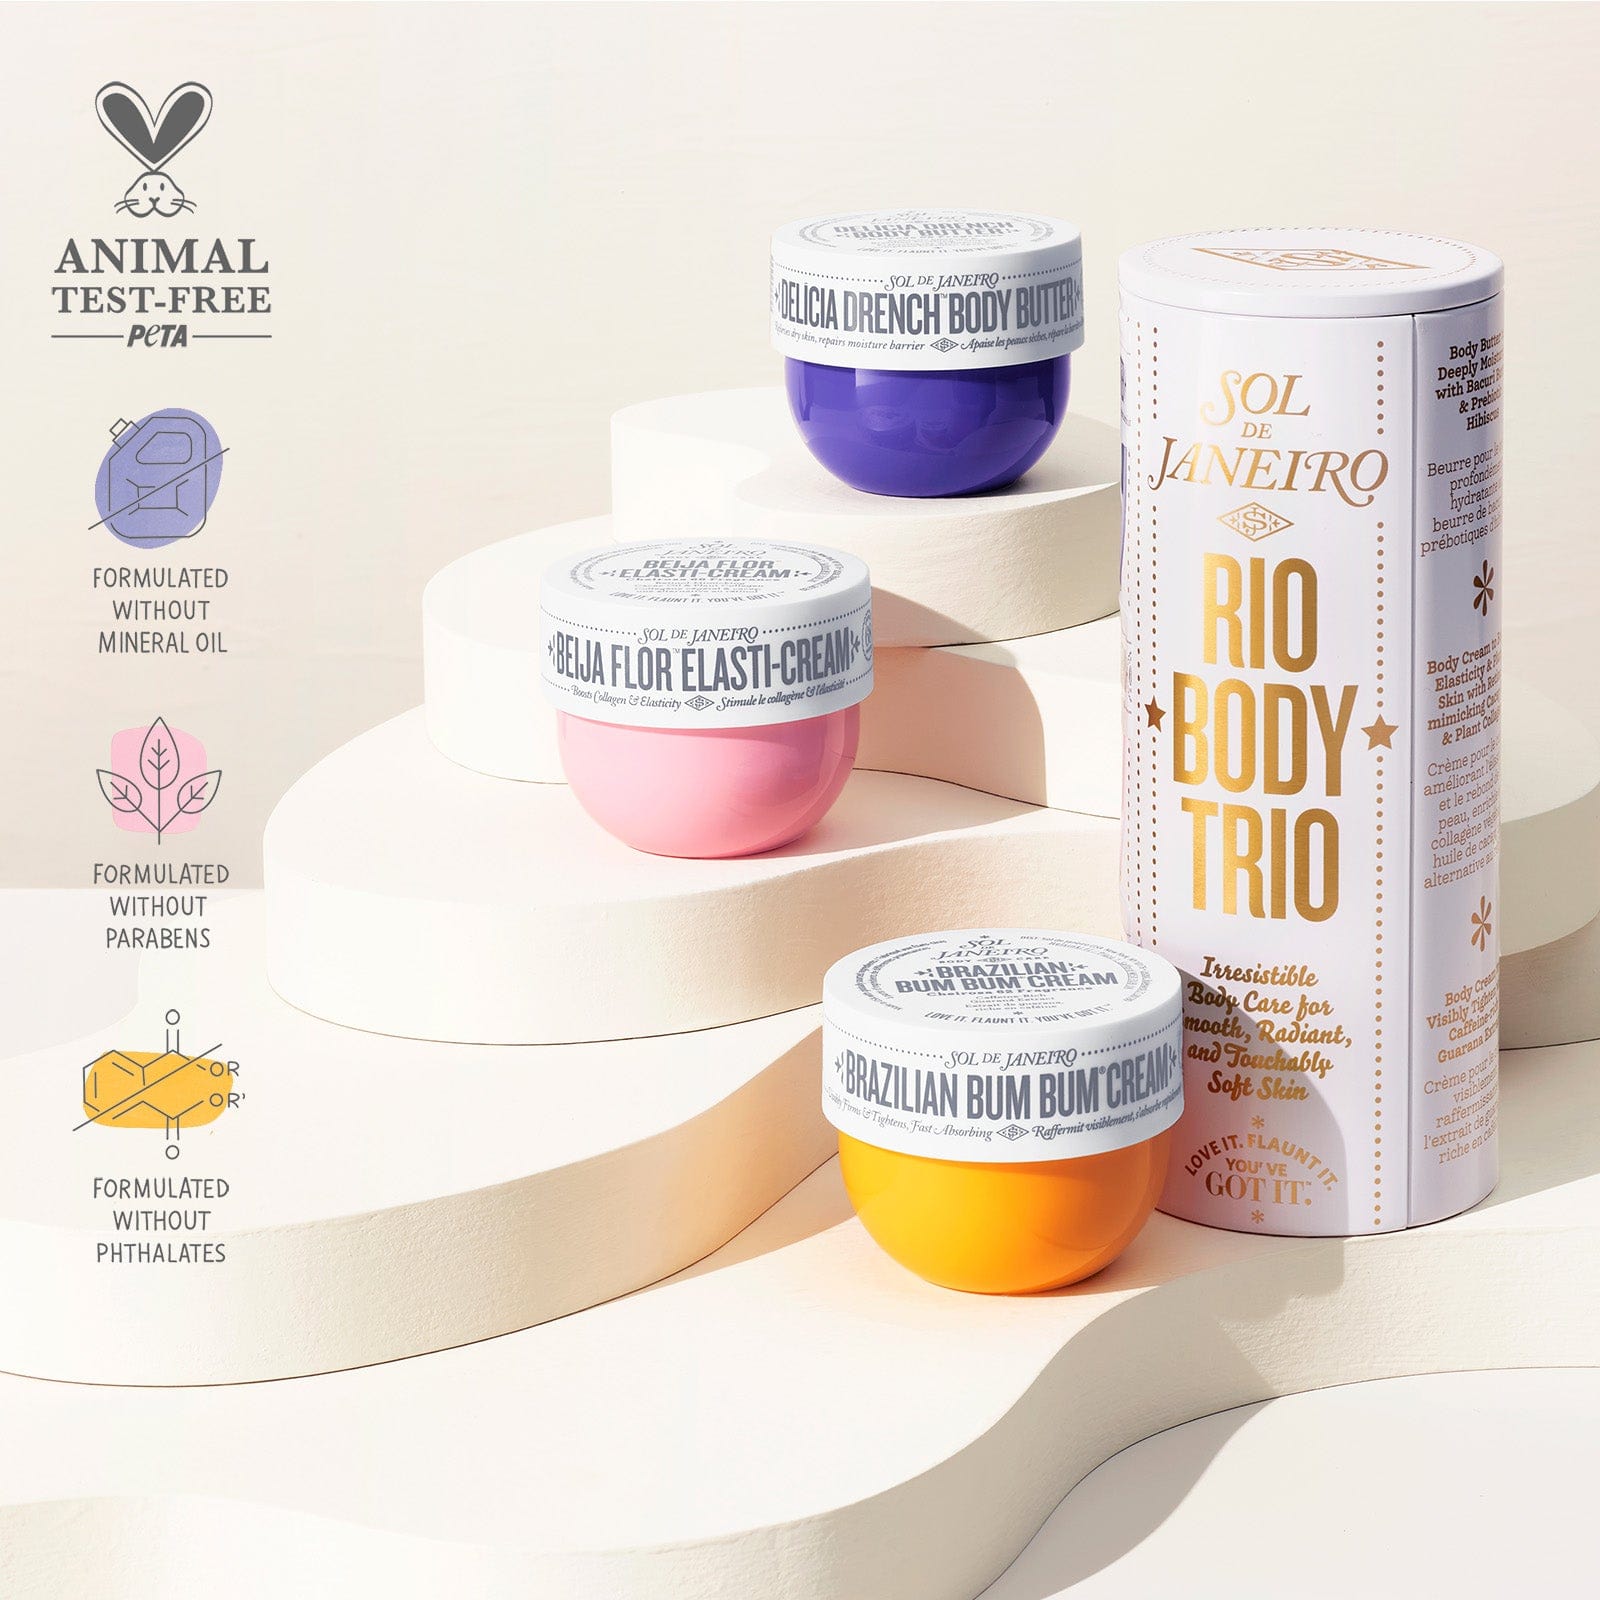 Animal test-free PETA - Formulated without parabens, mineral oil, phthalates.